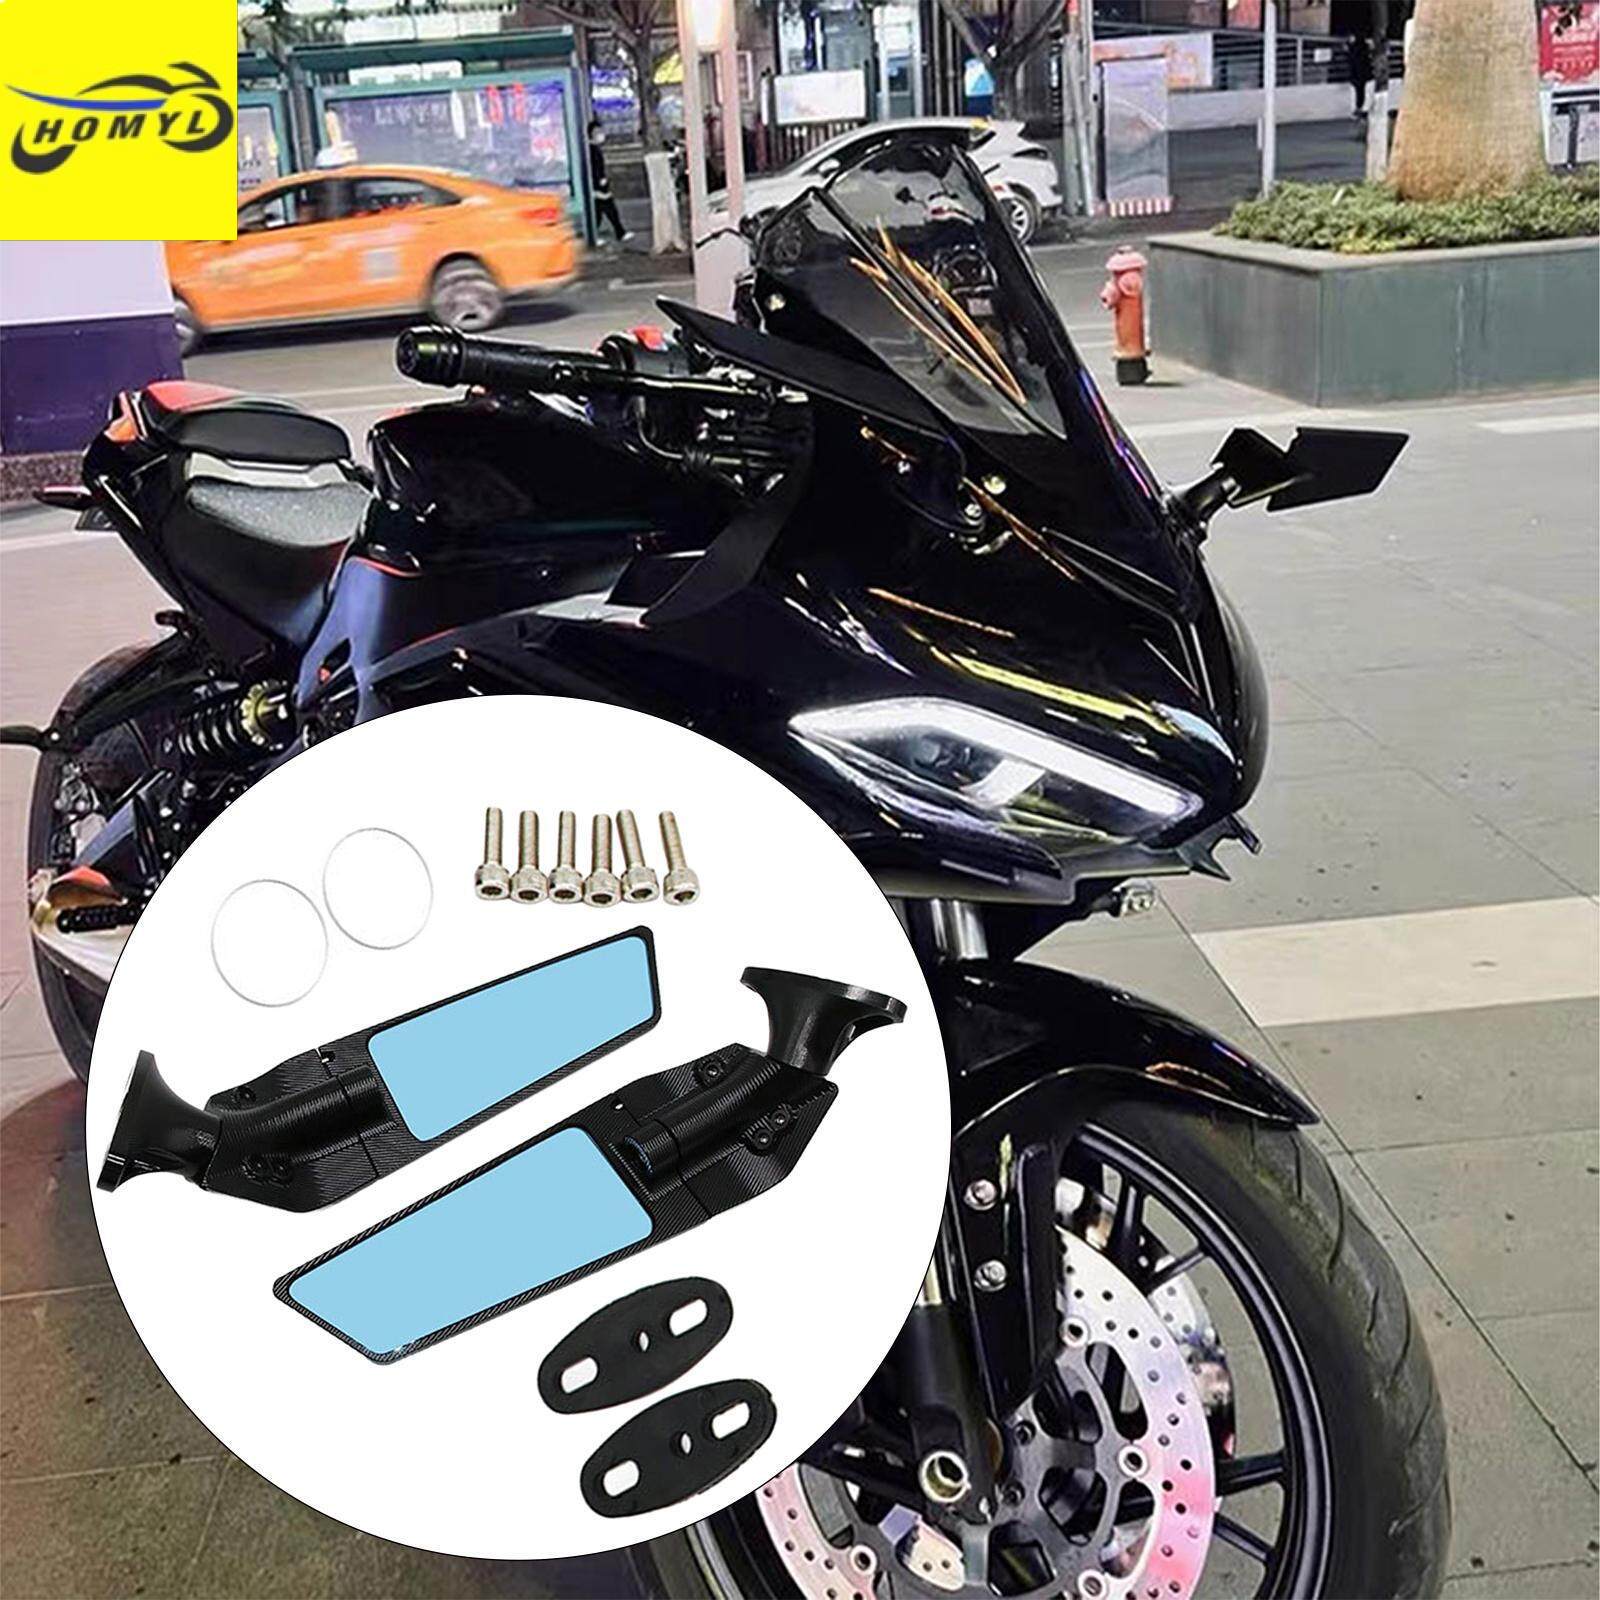 Motorcycle Side Rear View Mirror Universal Motorcycle Mirror Racer Rearview Accessories Mirror Motorcycle Parts Fit For Yamaha YZF R6 R1 R3 R125 2007 Z800 YBR125 Fit For DUCATI FF motorcycle mirrors 